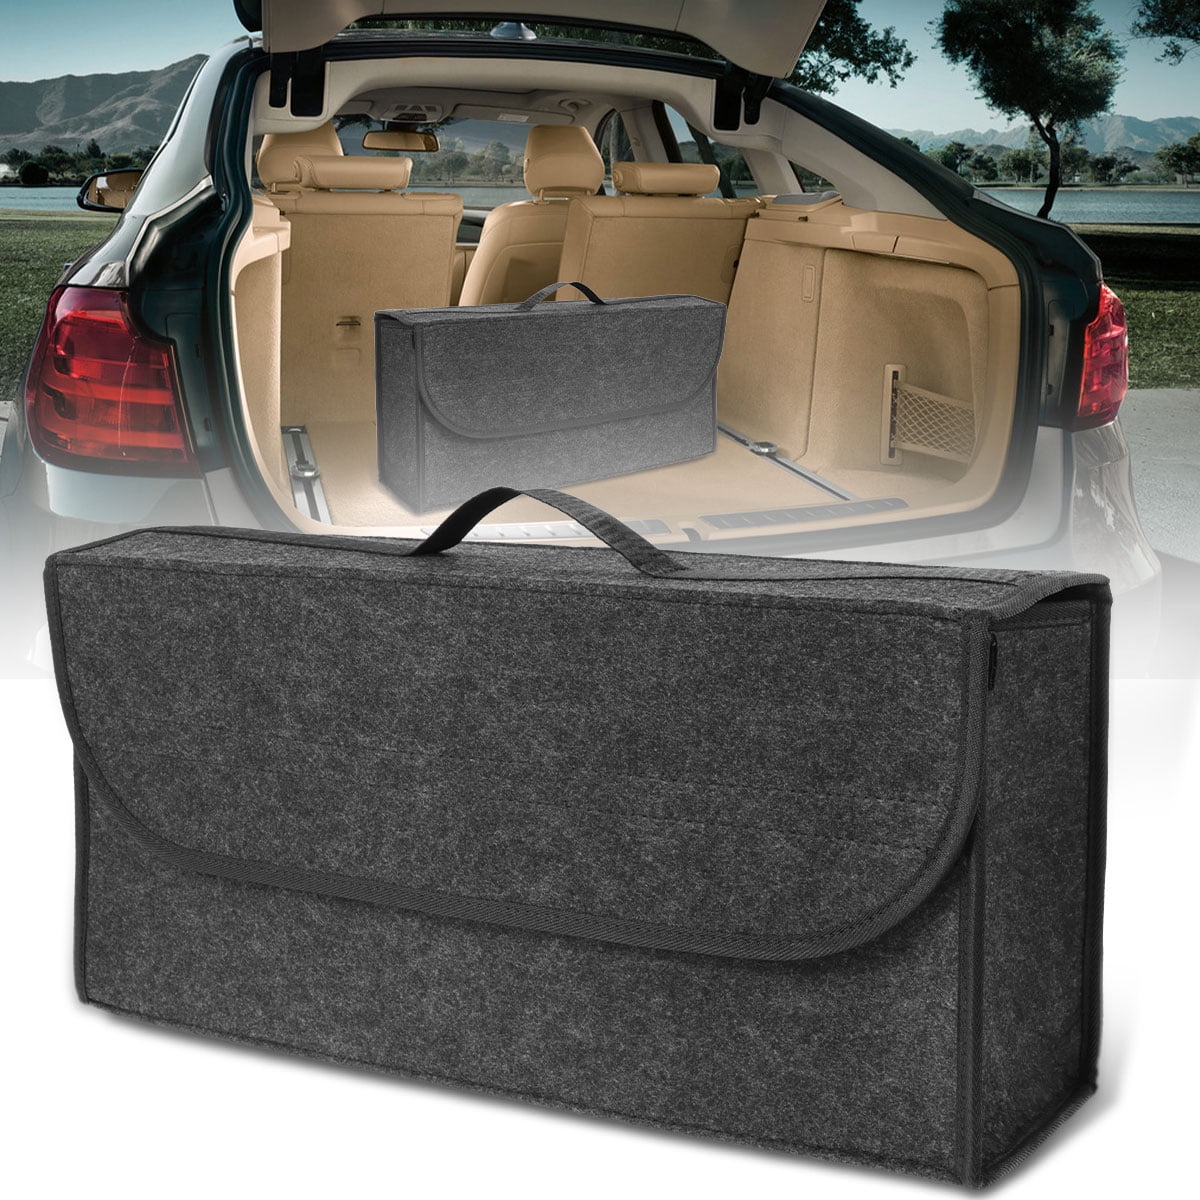 Qenwkx Soft Felt Car Bag Organizer Folding Car Storage Box Case seat Trunk  Non Slip Fireproof with Handle Collapsible Space Saving for Fire